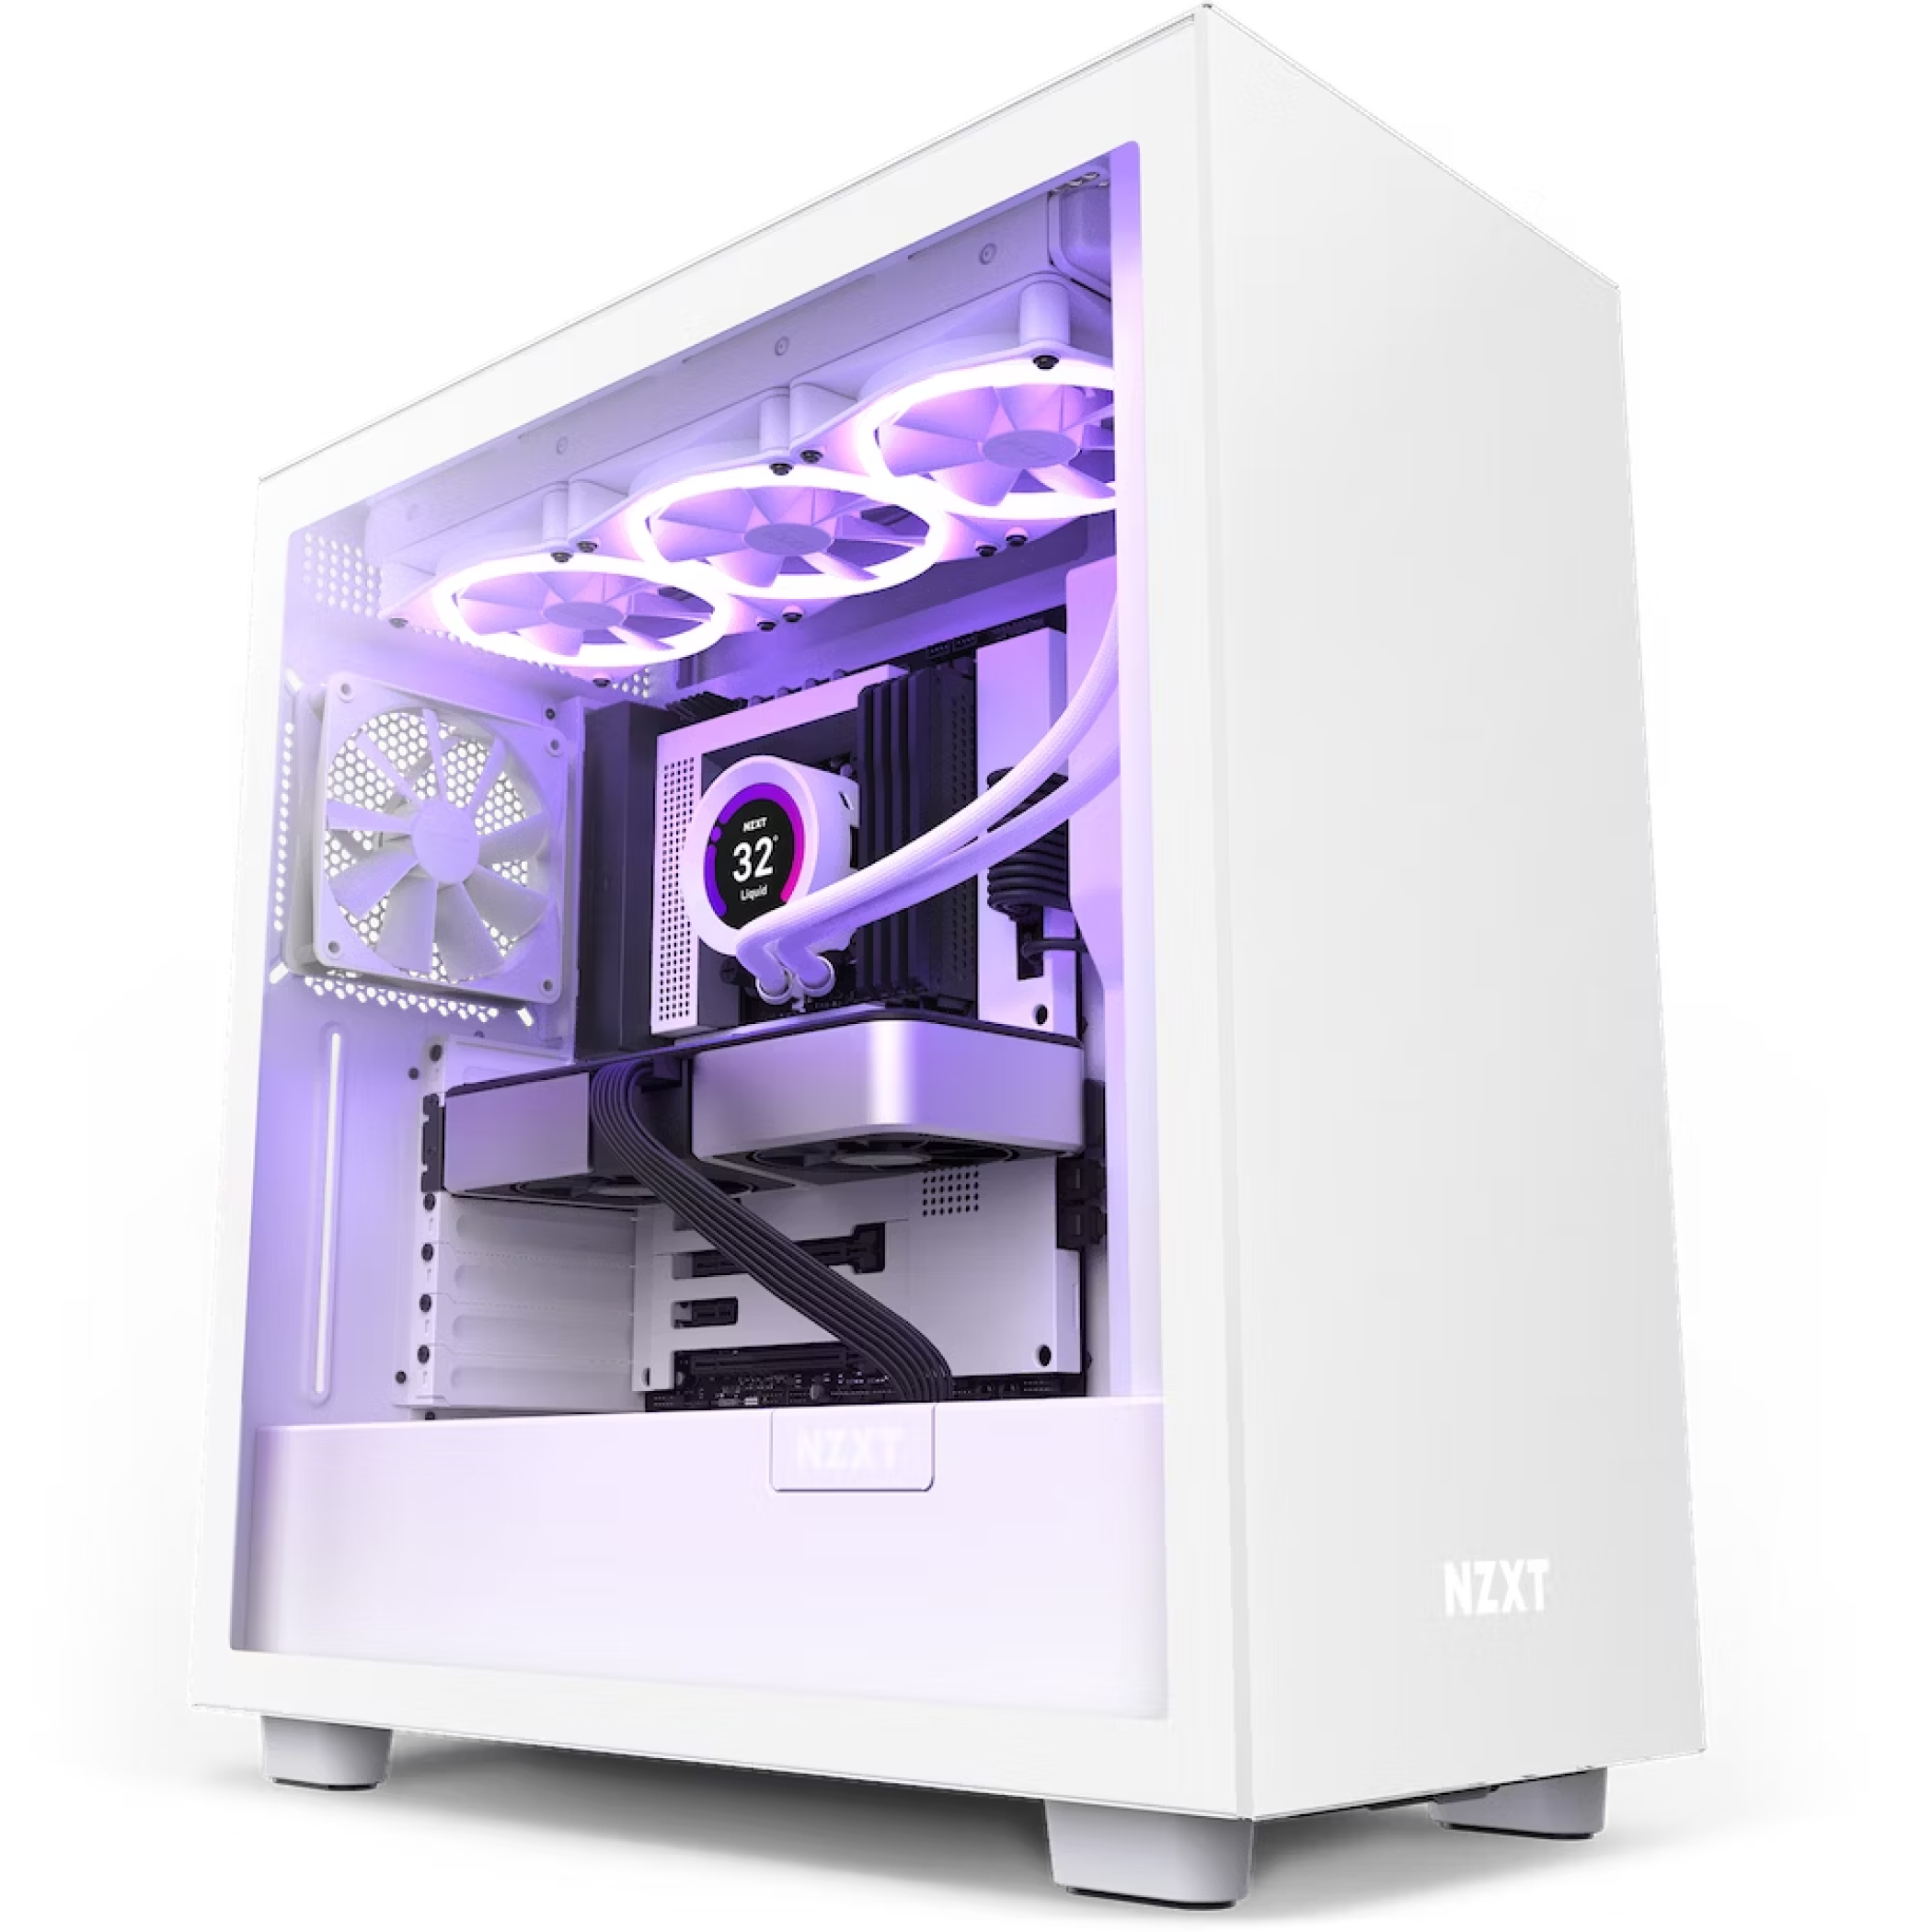 The NZXT H7 case.